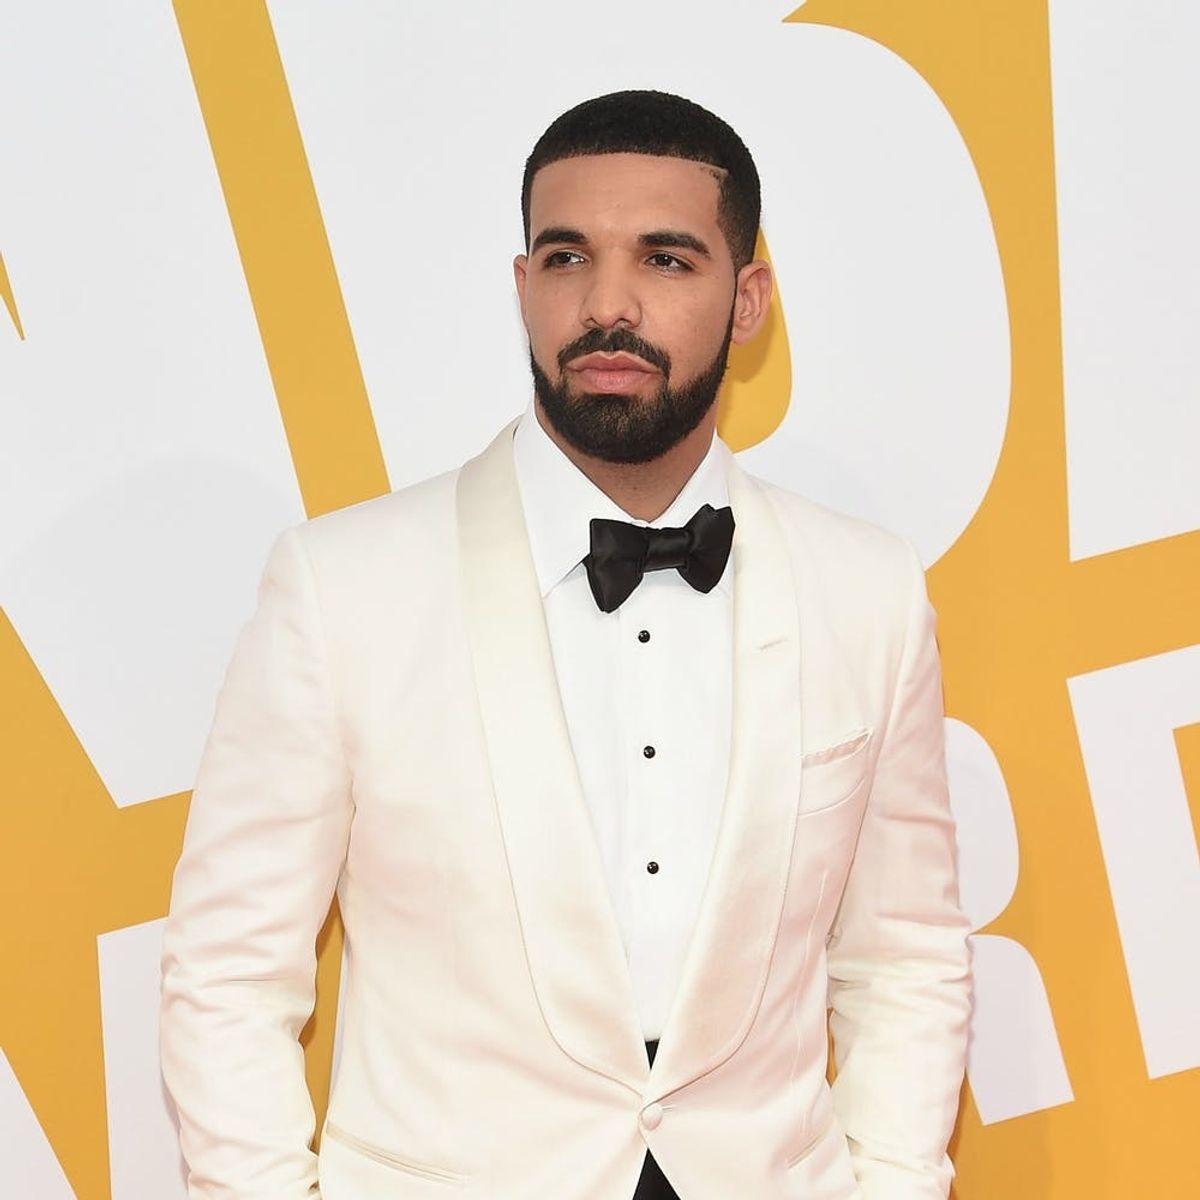 Drake Threw Himself an Epic Early-2000s Themed Birthday Party